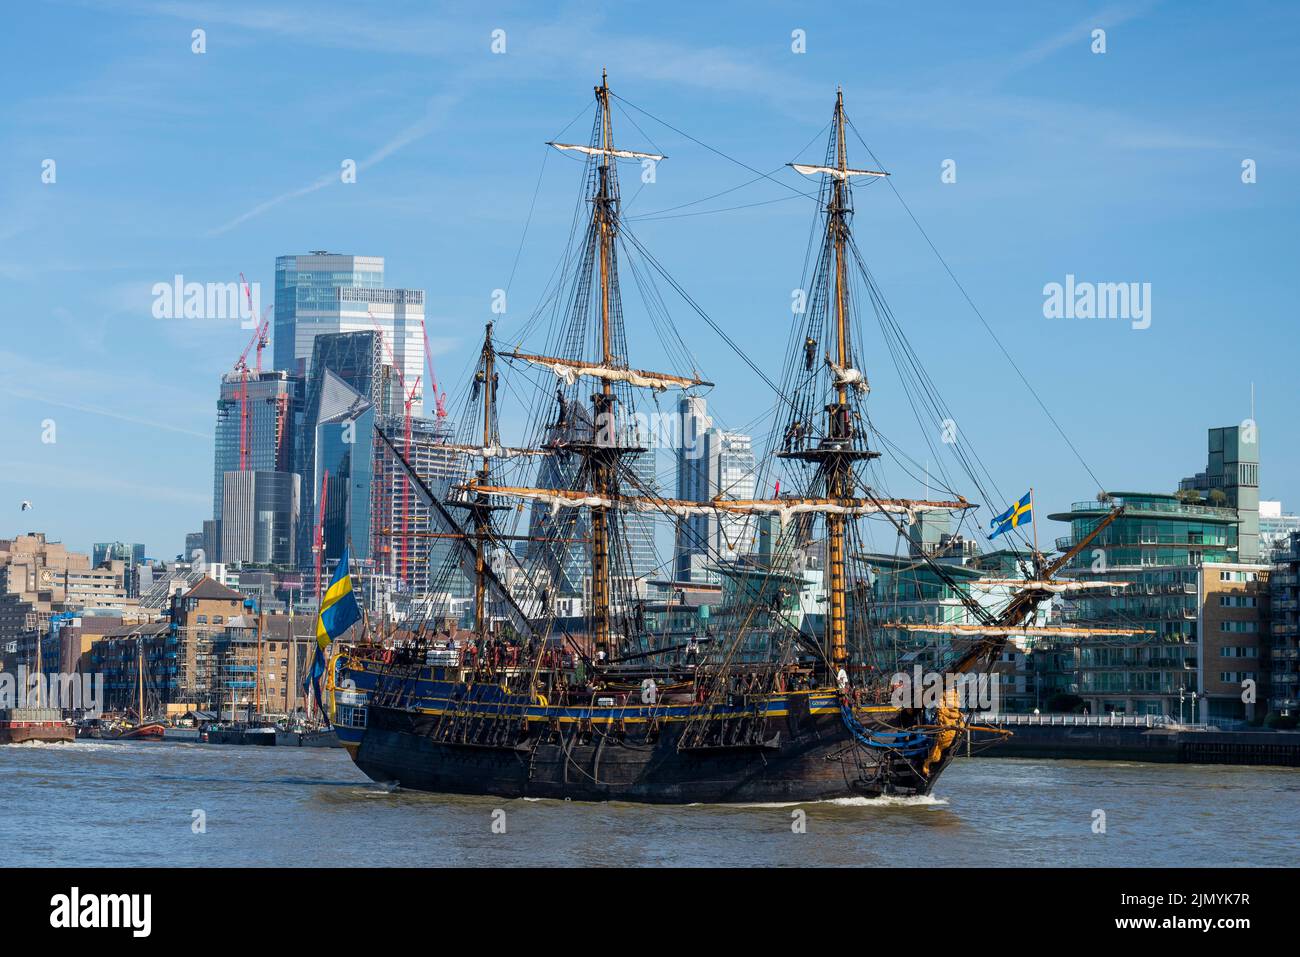 Tower Bridge, London, UK. 8th Aug, 2022. Gotheborg of Sweden is a sailing replica of the Swedish East Indiaman Gotheborg I, launched in 1738, and is visiting London to welcome visitors on board. The wooden replica ship was launched in 2003 and last visited London in 2007. It has navigated up the River Thames in the morning to pass under the opened Tower Bridge before turning and passing back under and heading for Thames Quay in Canary Wharf, where it will be open to visitors. Passing the financial district. Historic and modern trade juxtaposition Stock Photo